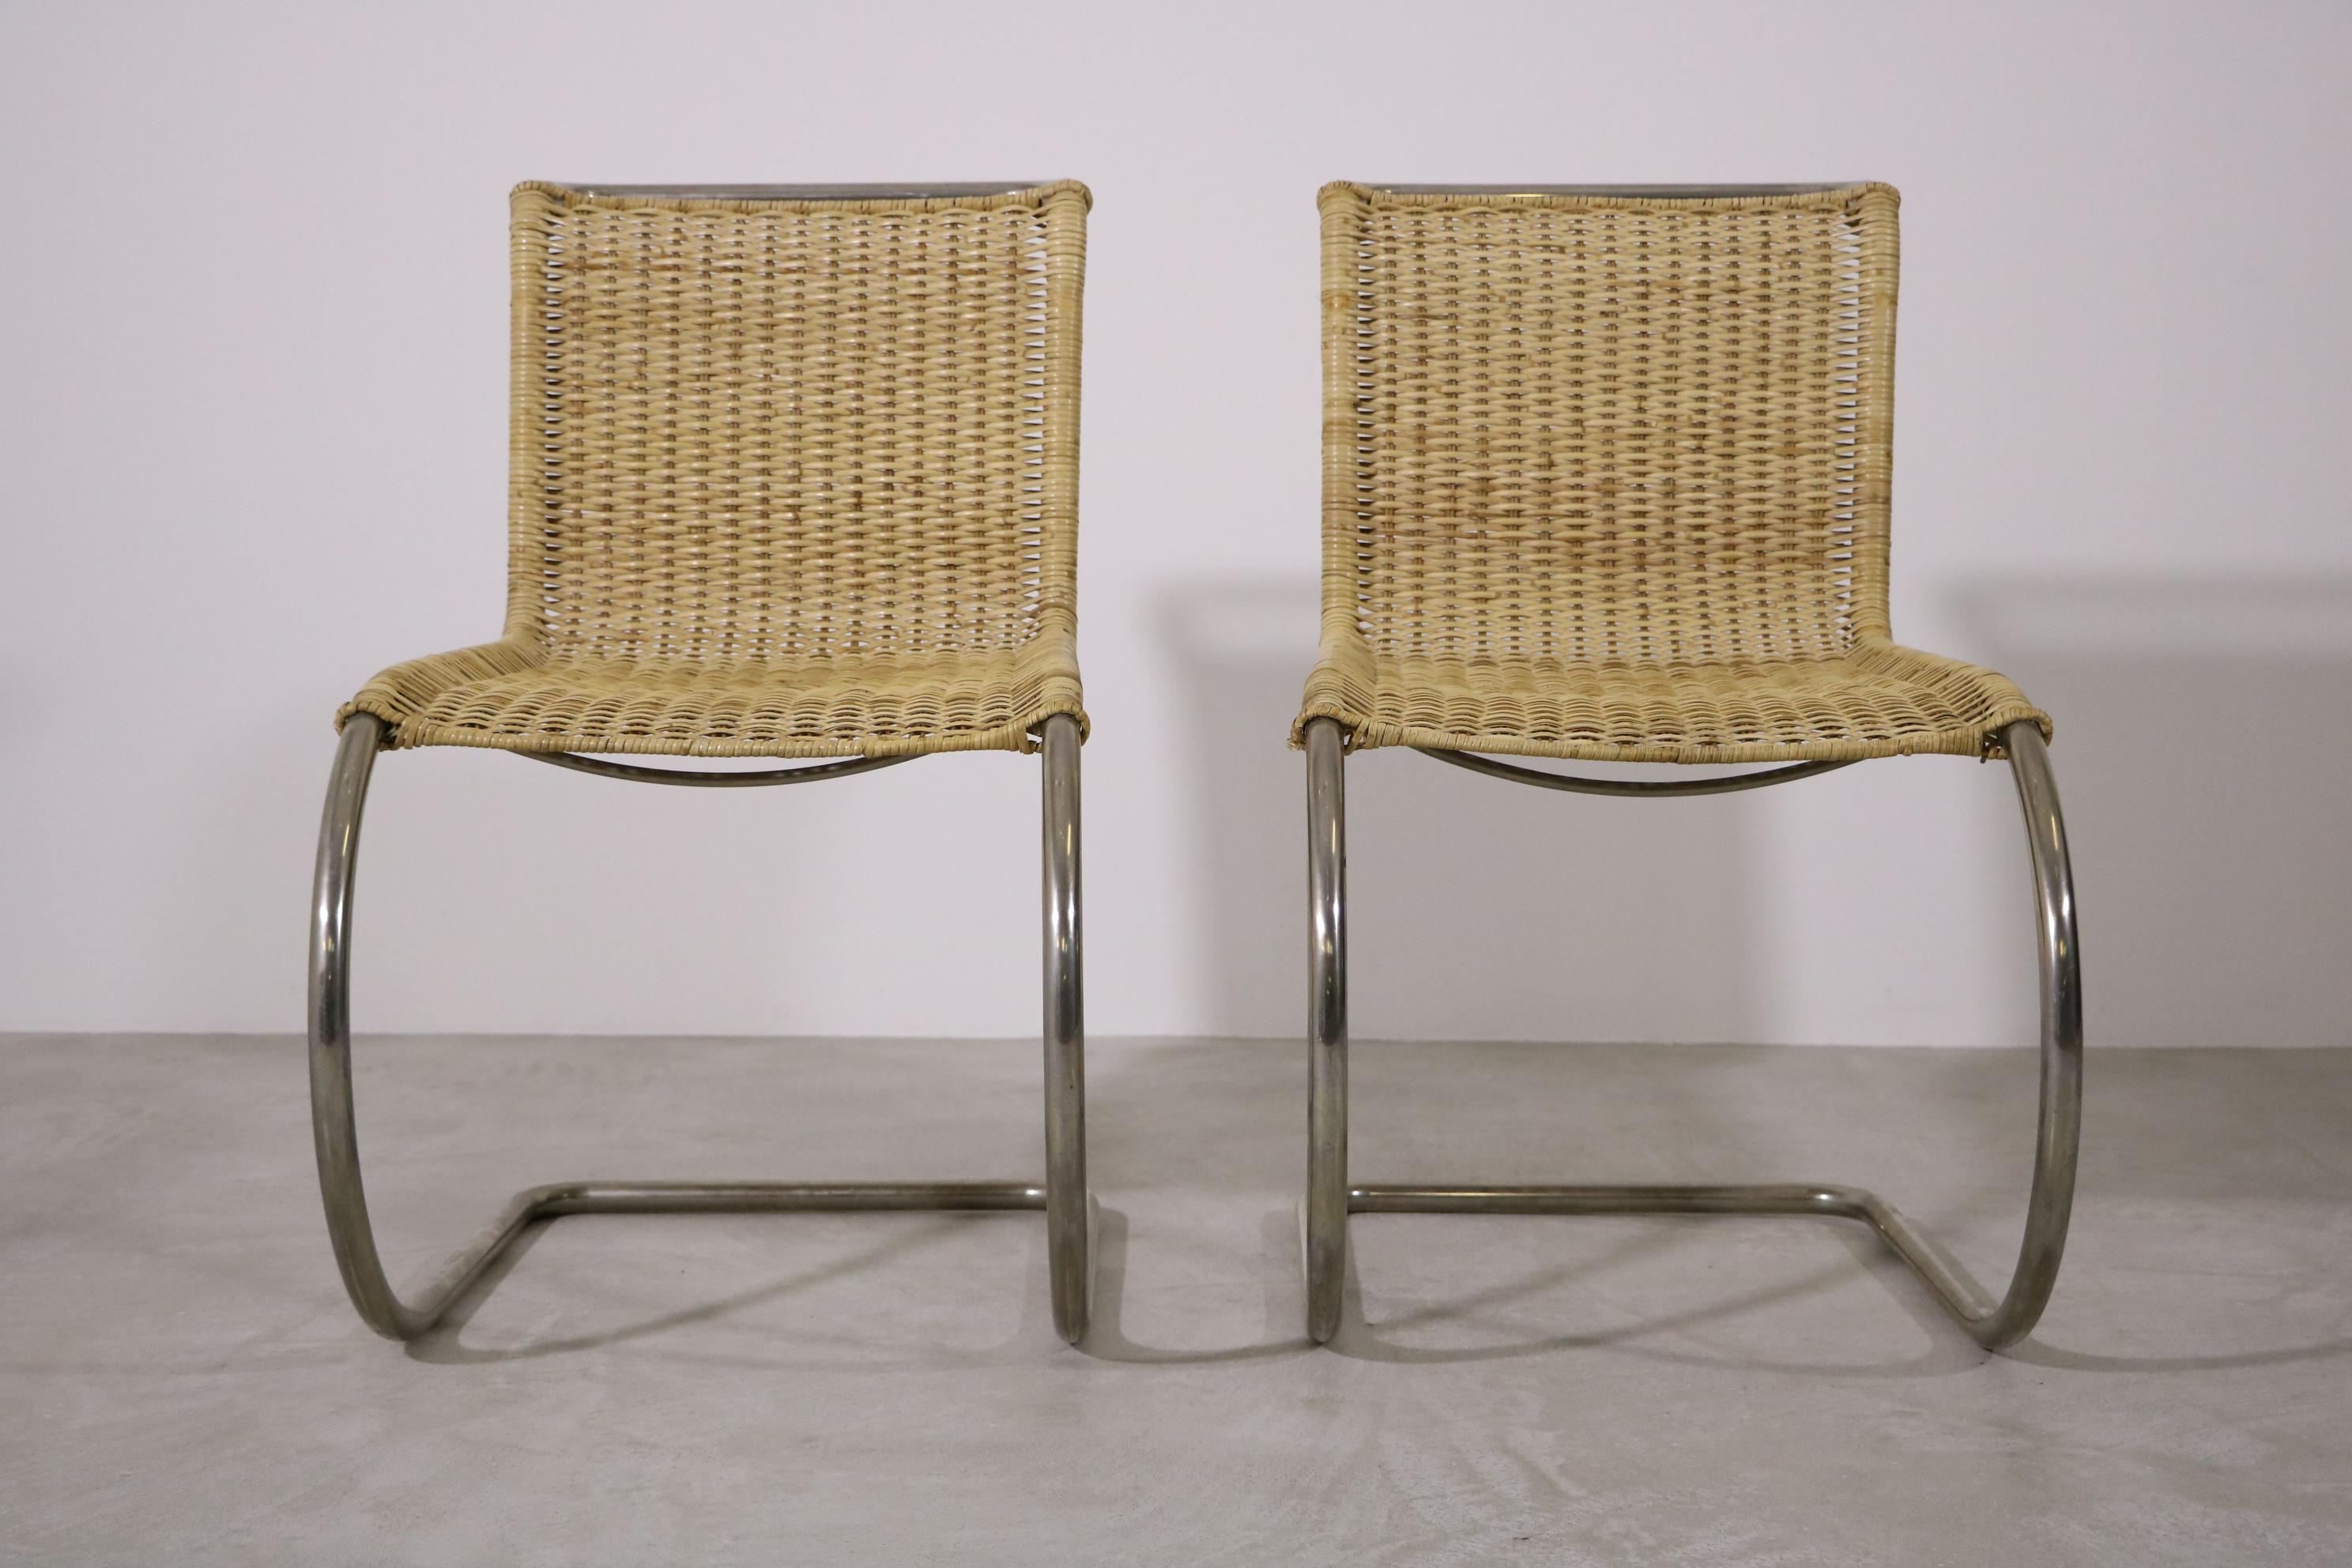 In good original condition, with minor signs of age and use, which have preserved a beautiful patina.

These two vintage cantilever chairs were manufactured by Tecta in Germany around 1960.

Ludwig Mies van der Rohe designed the B42 masterpiece